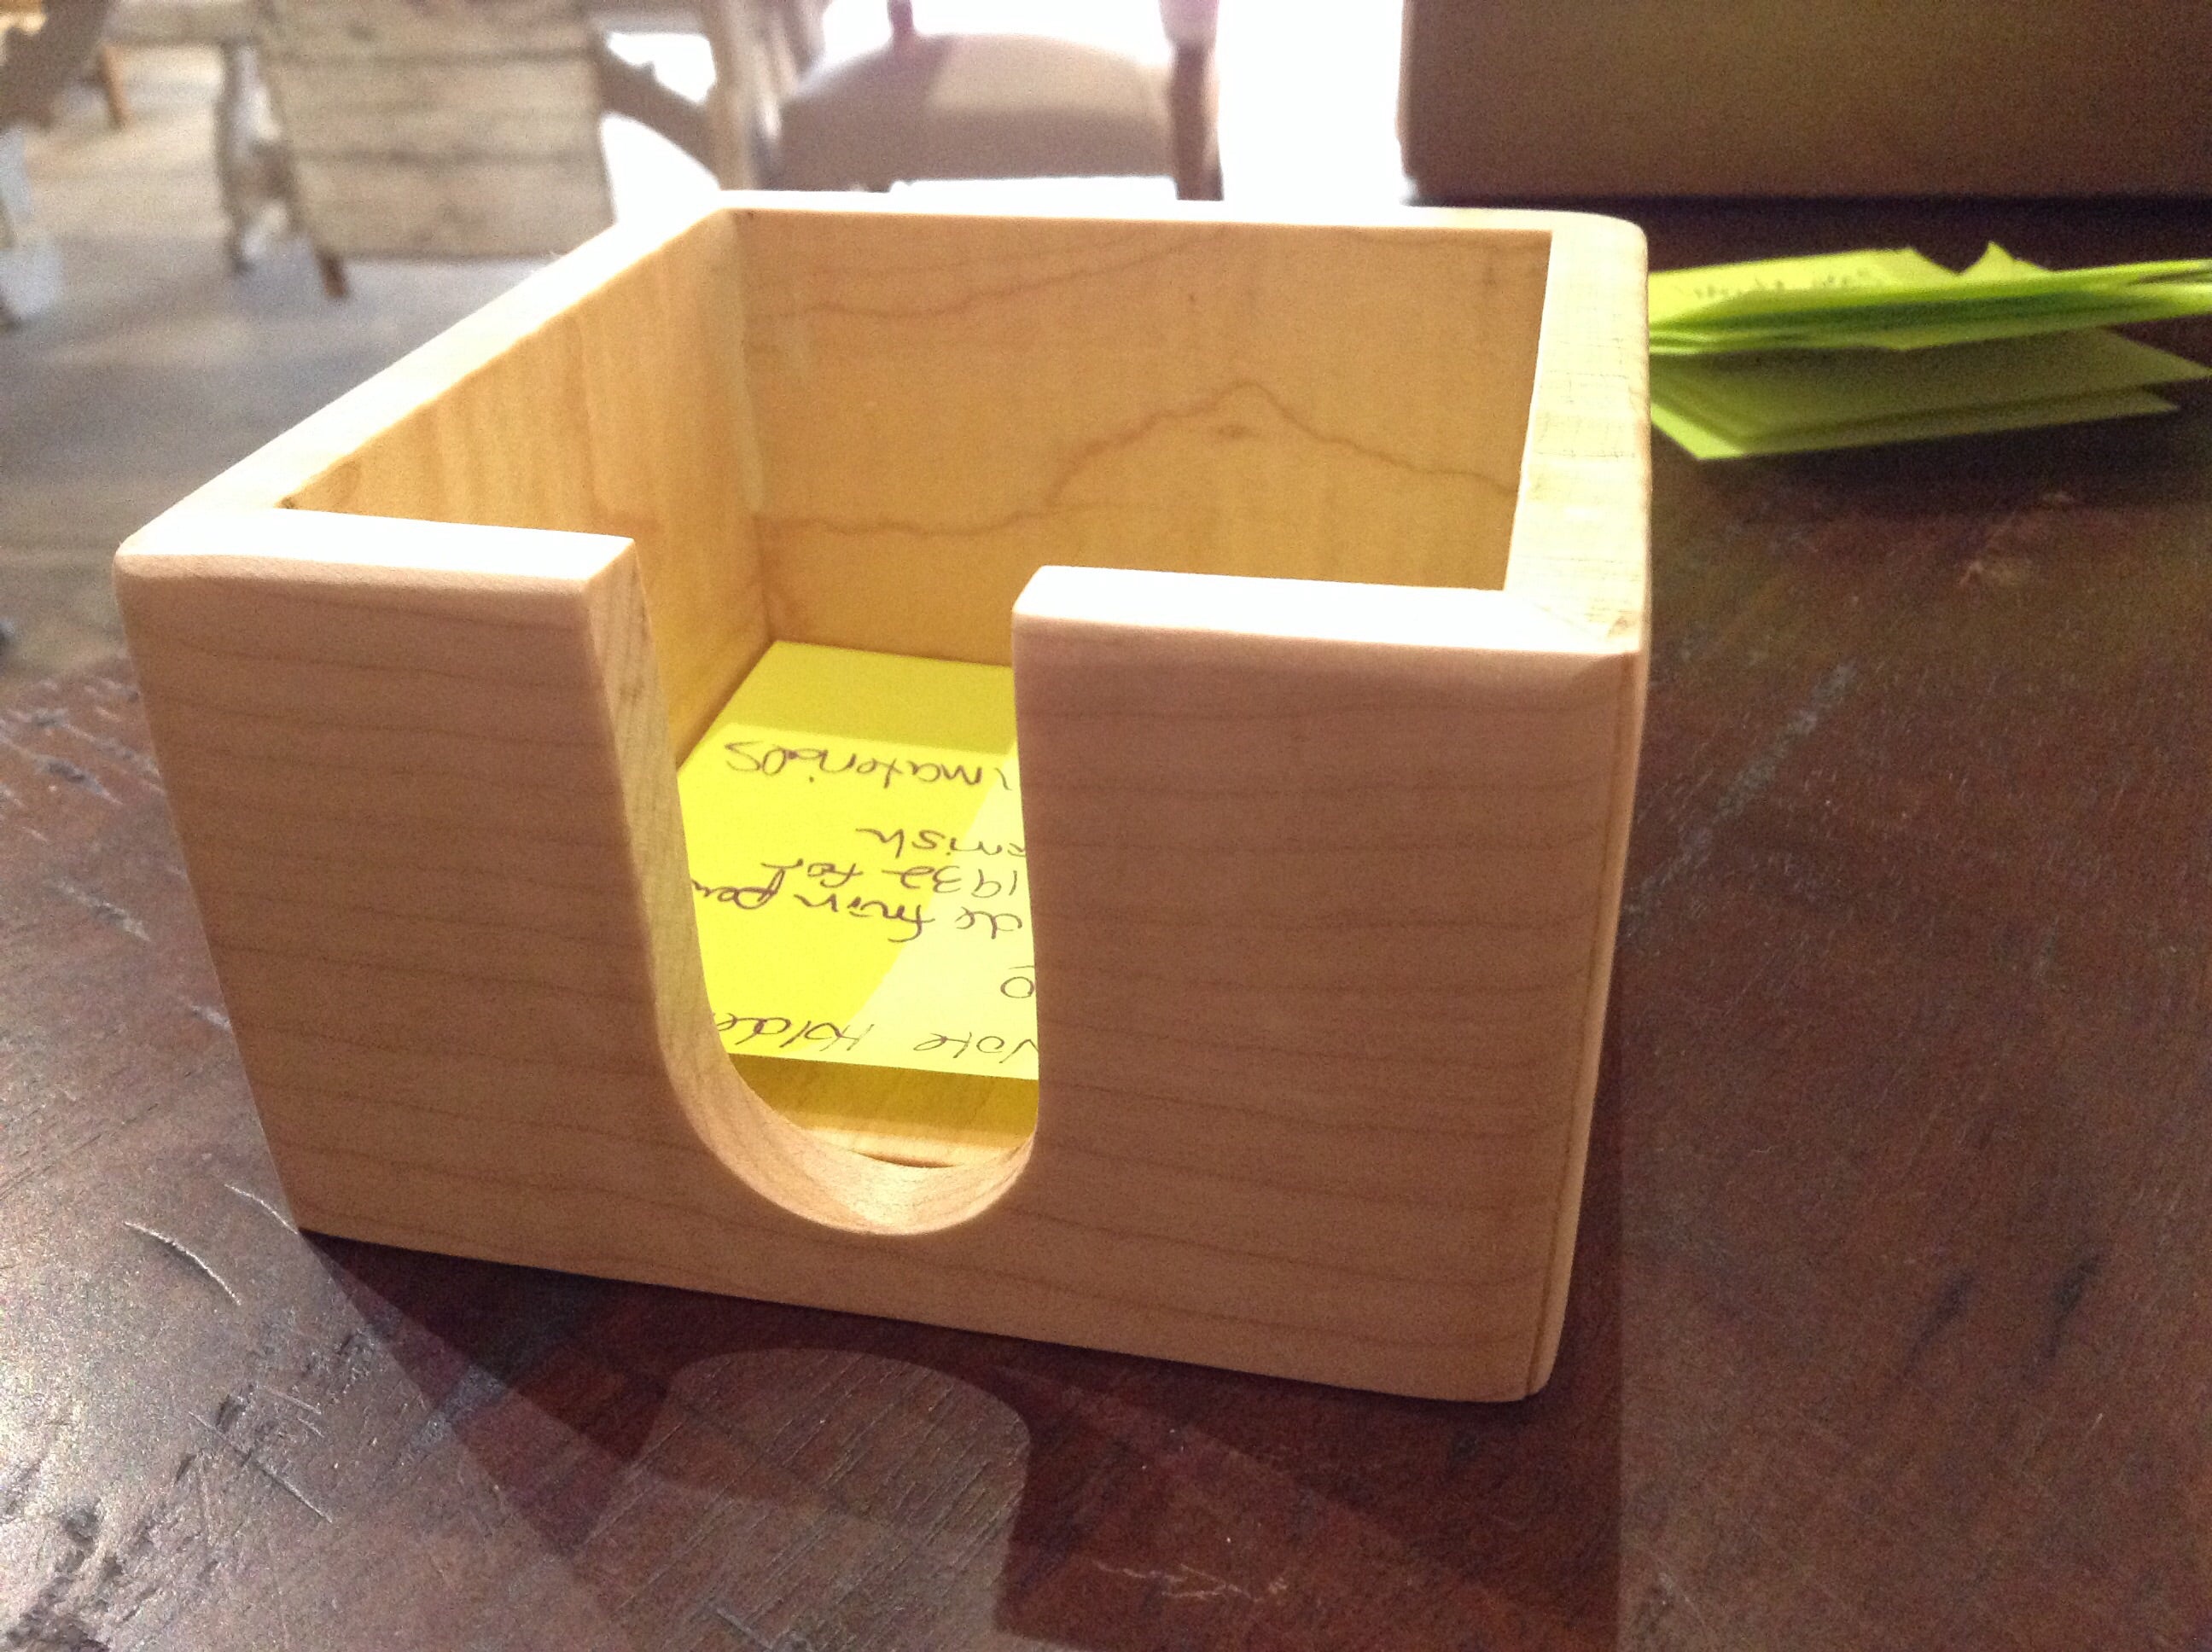 Post It note boxes